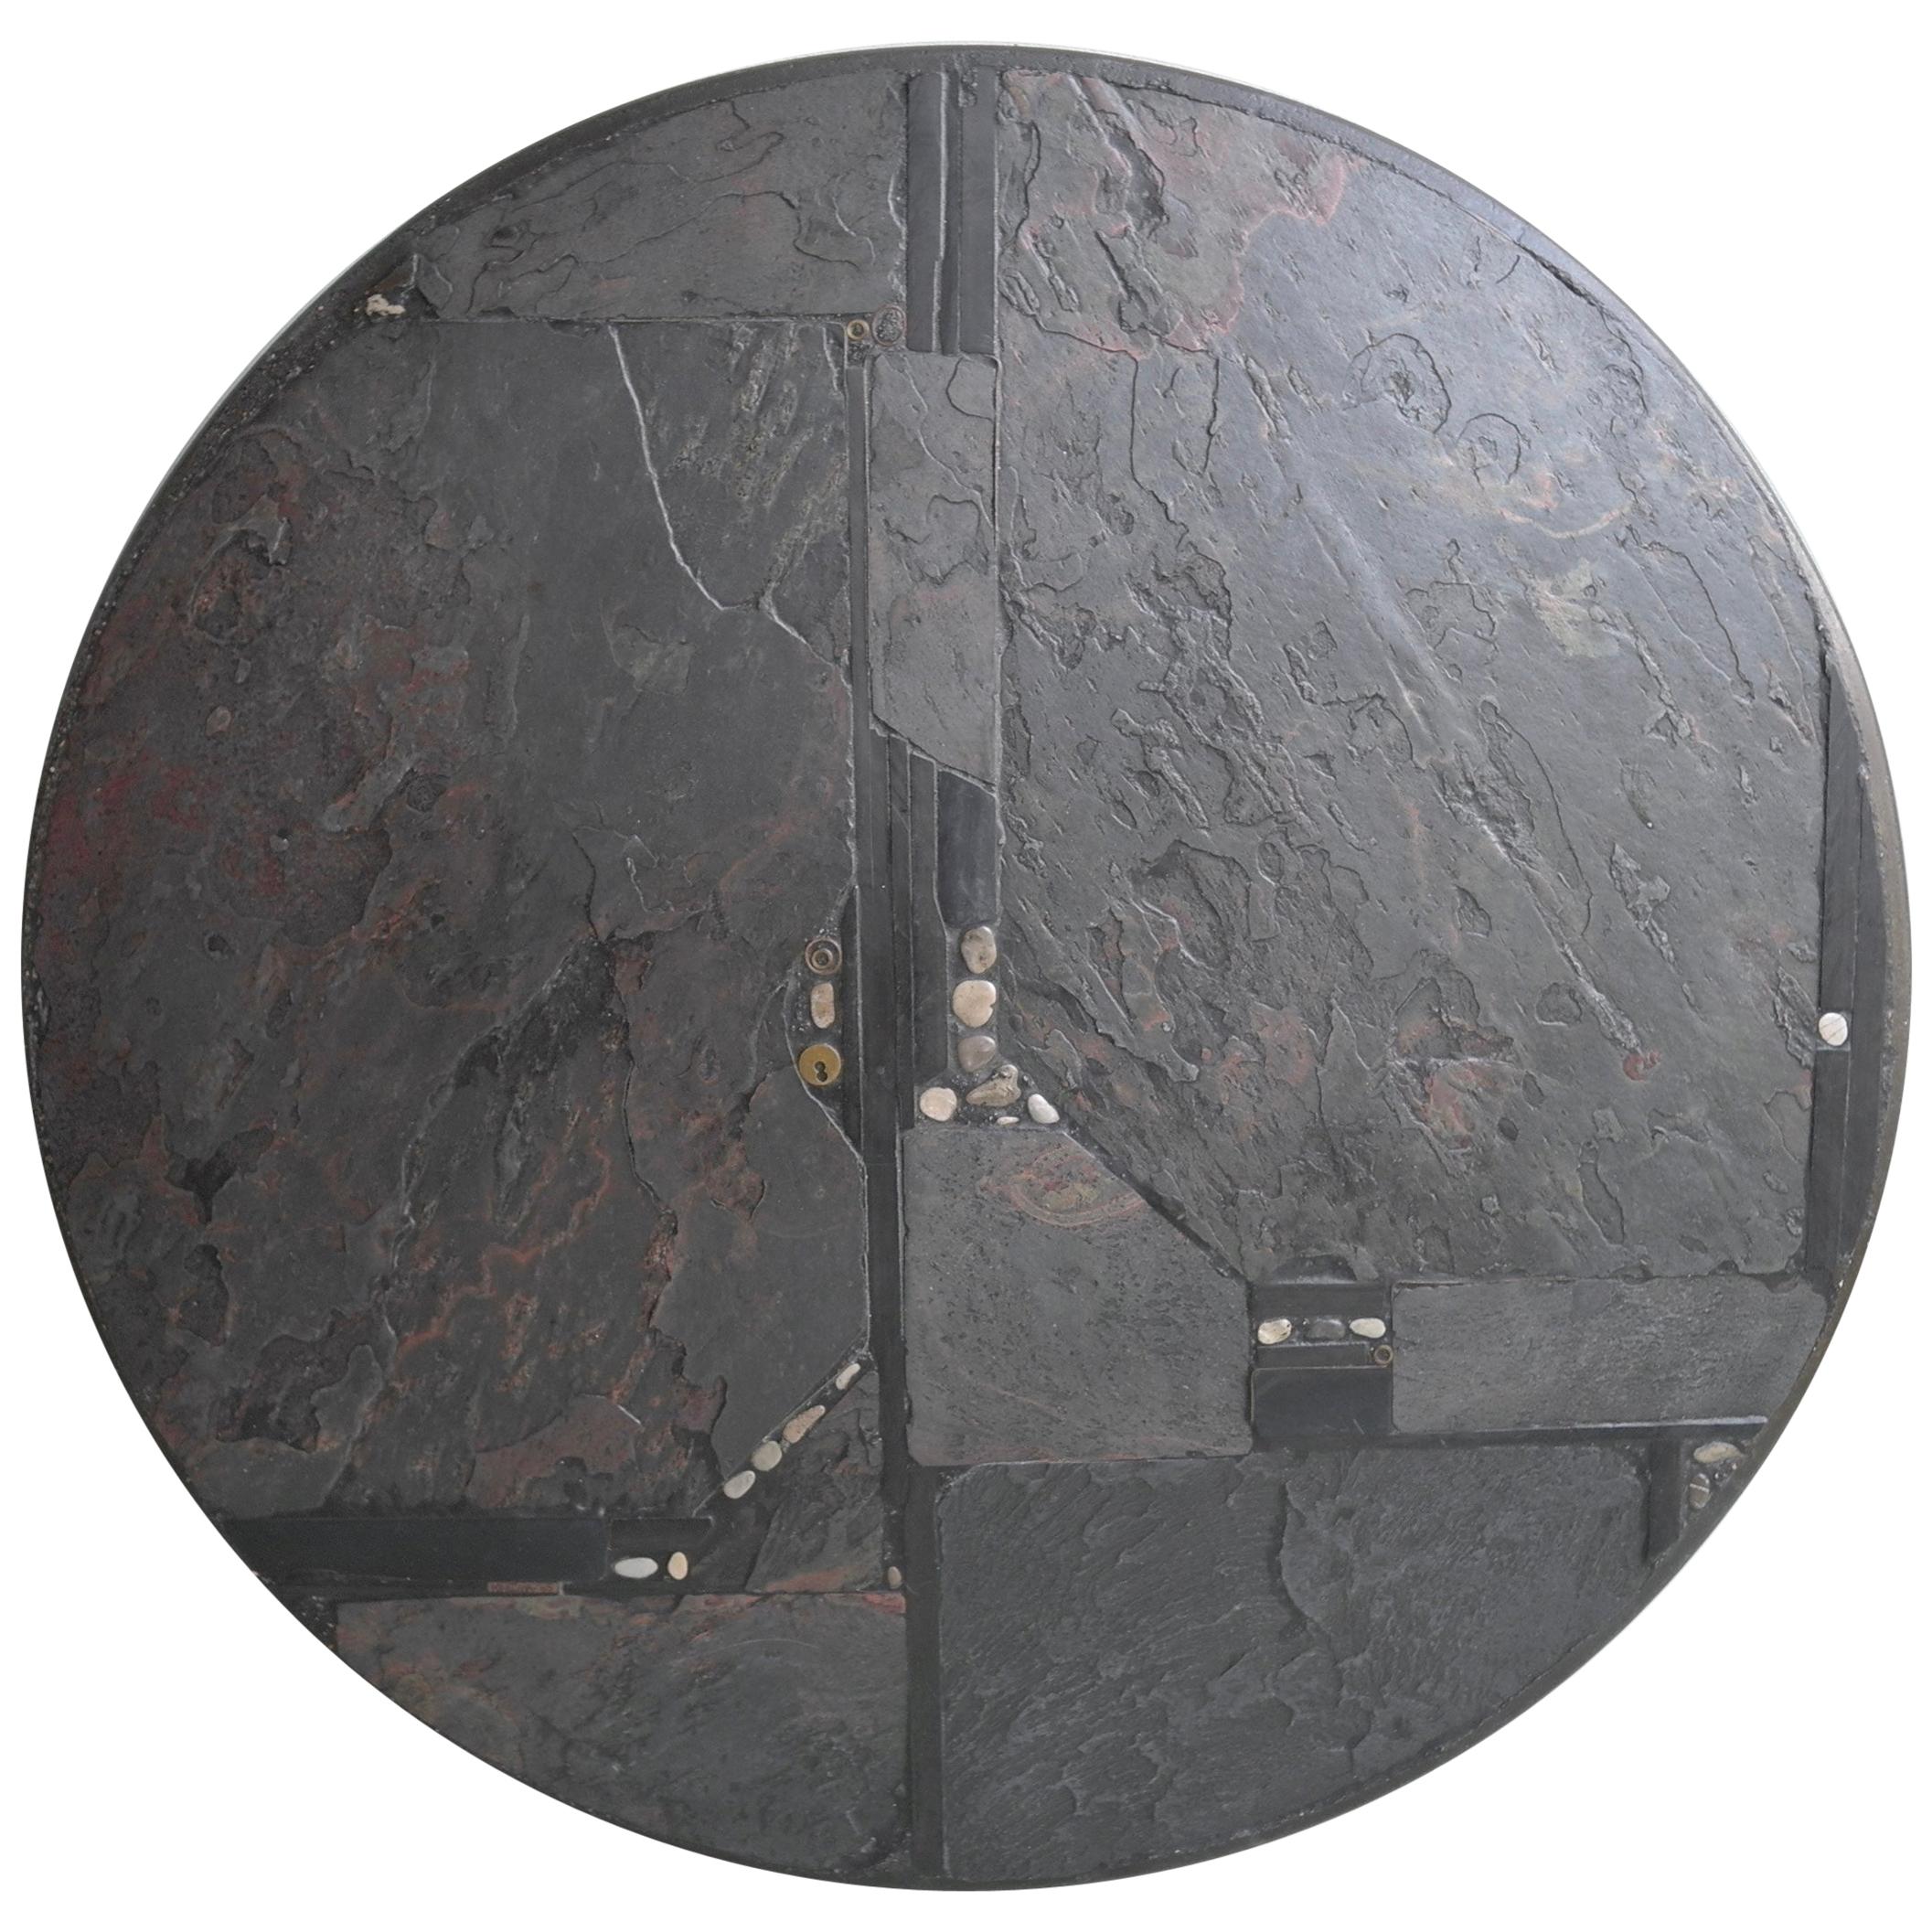 Paul Kingma Round Art Coffee Table in Slate, Grey and Black Stone, Brass Details